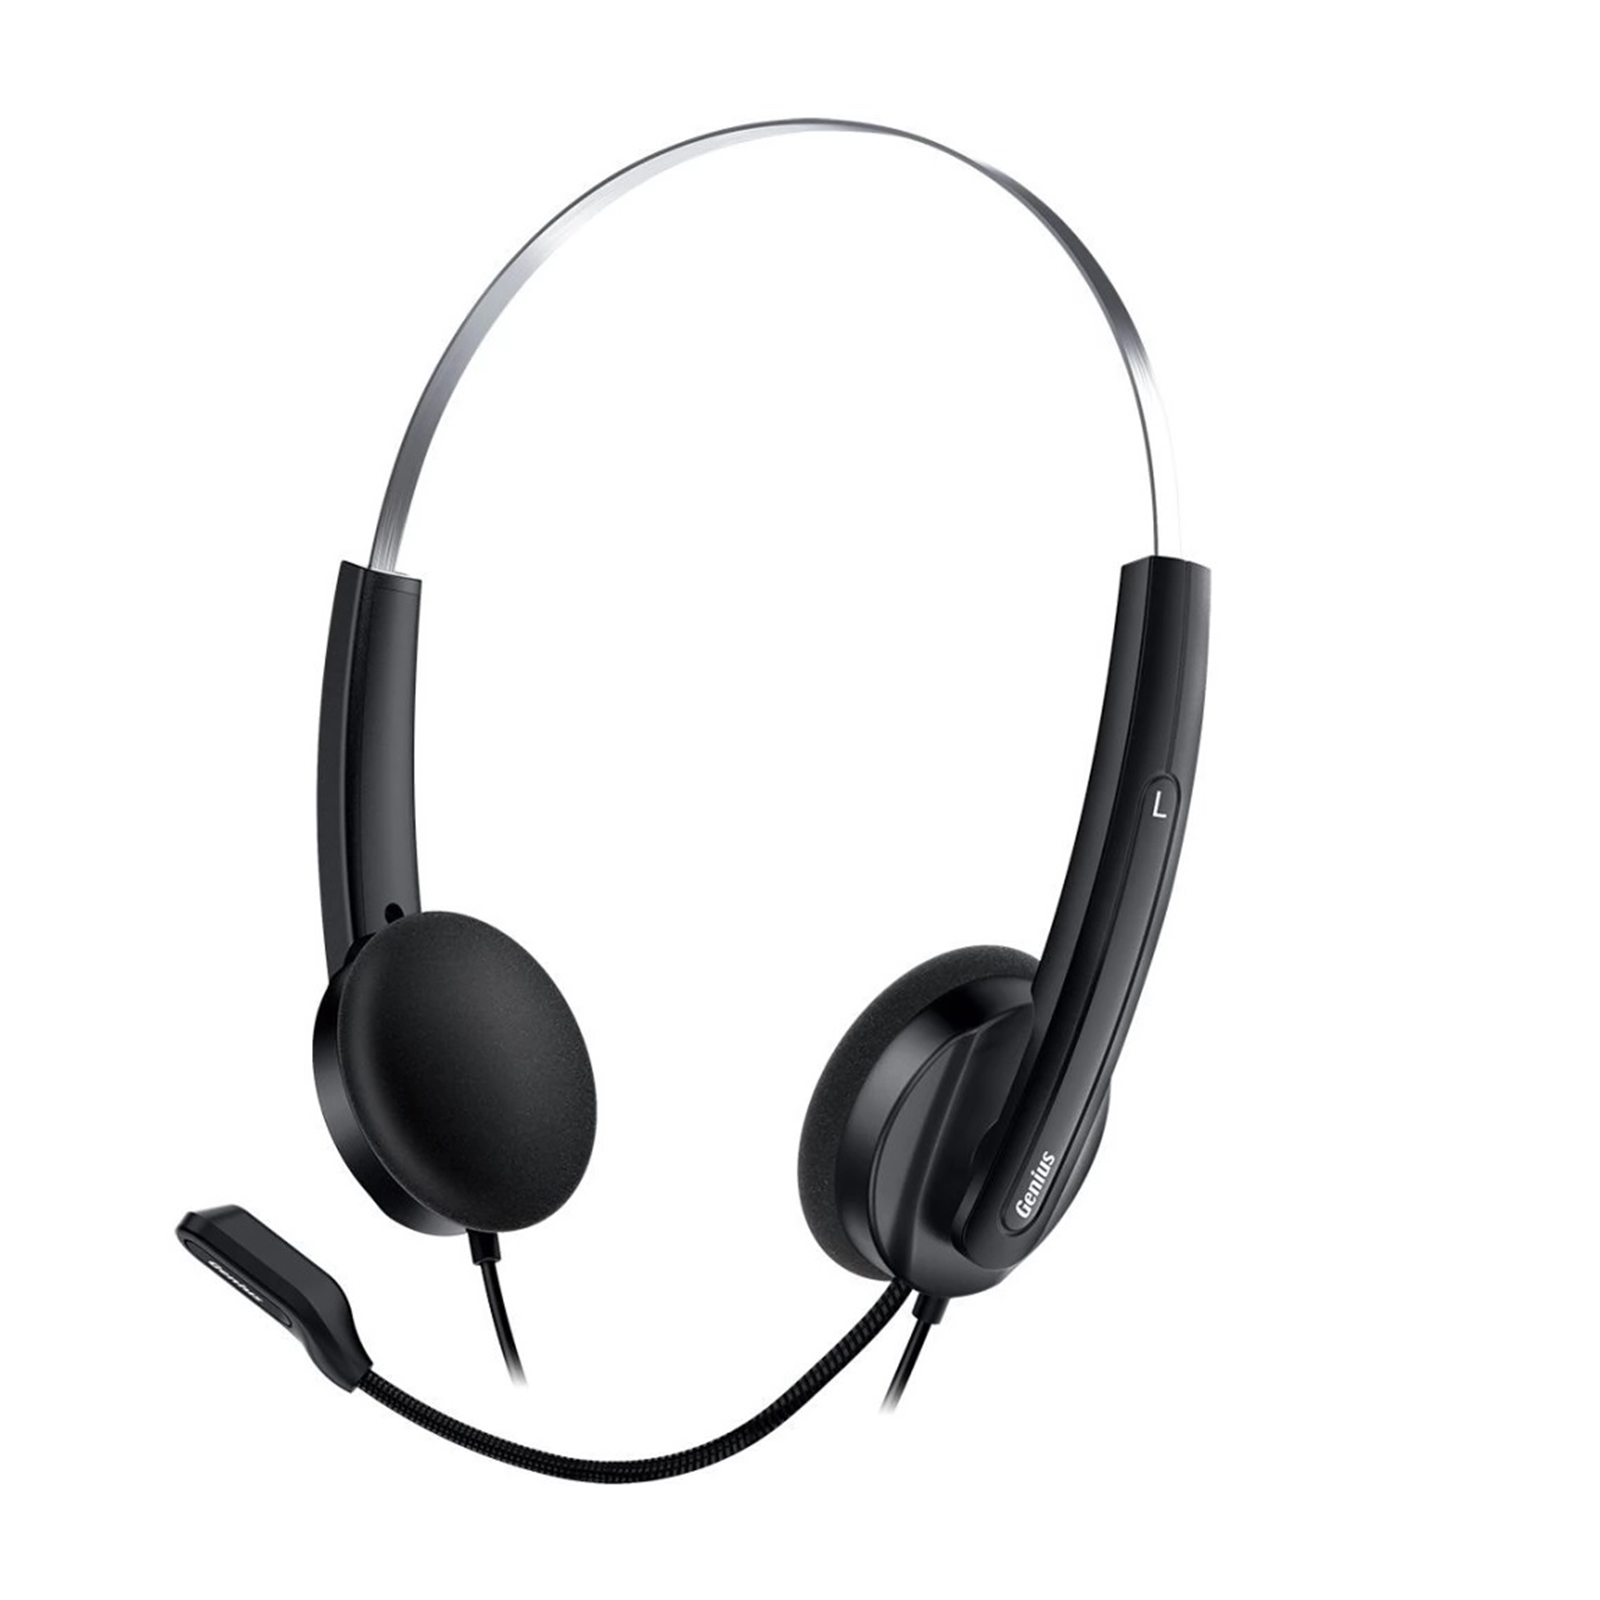 Genius HS-220U Ultra Lightweight Headset with Mic, USB Connection, Plug and Play, Adjustable Headband and microphone with In-line Volume Control, Black